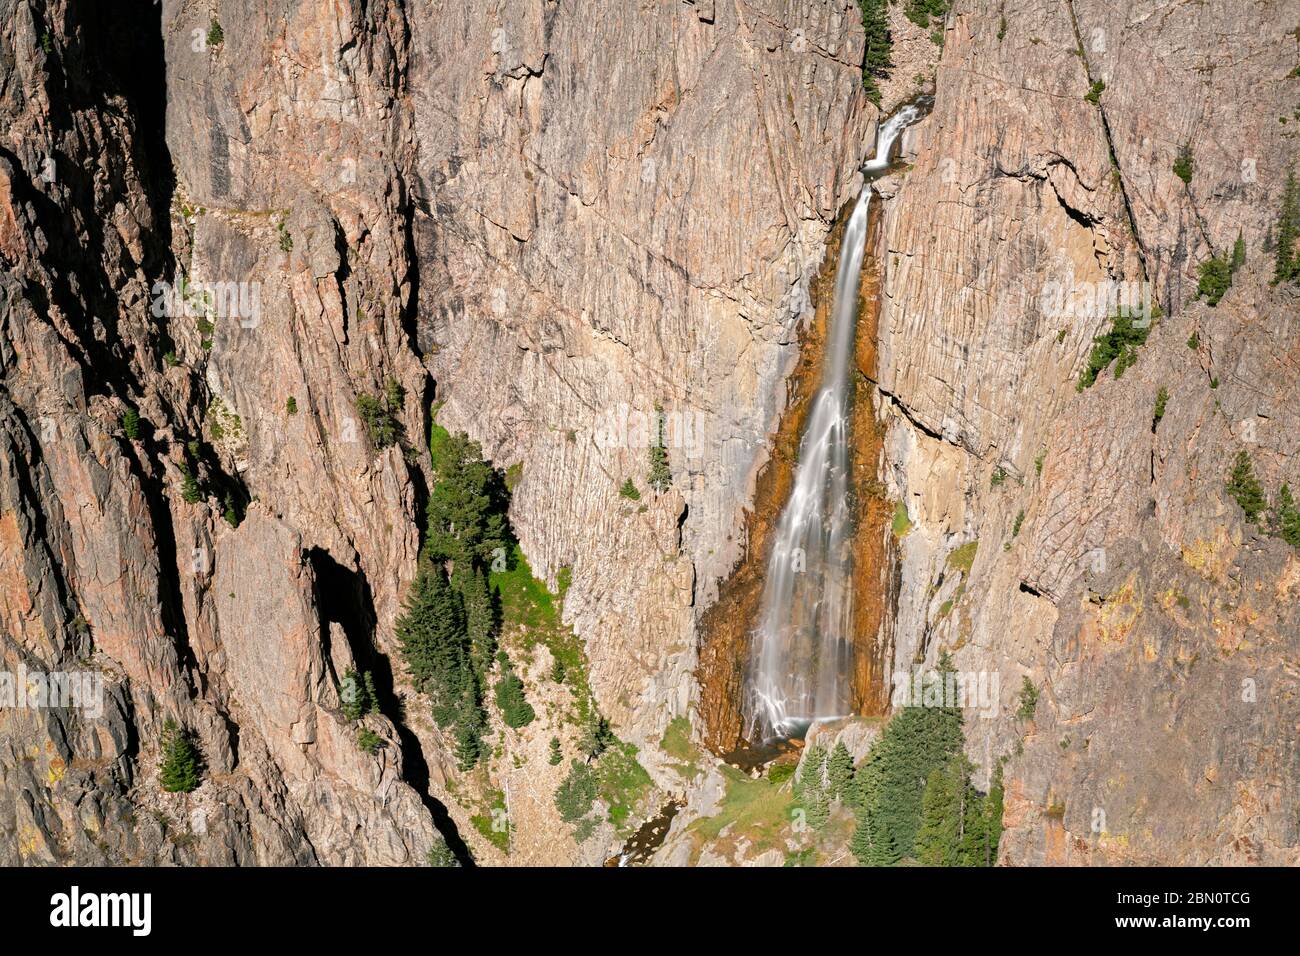 WY04210-00...WYOMING - Bucking Mule Falls in the Bighorn National Forest. Stock Photo